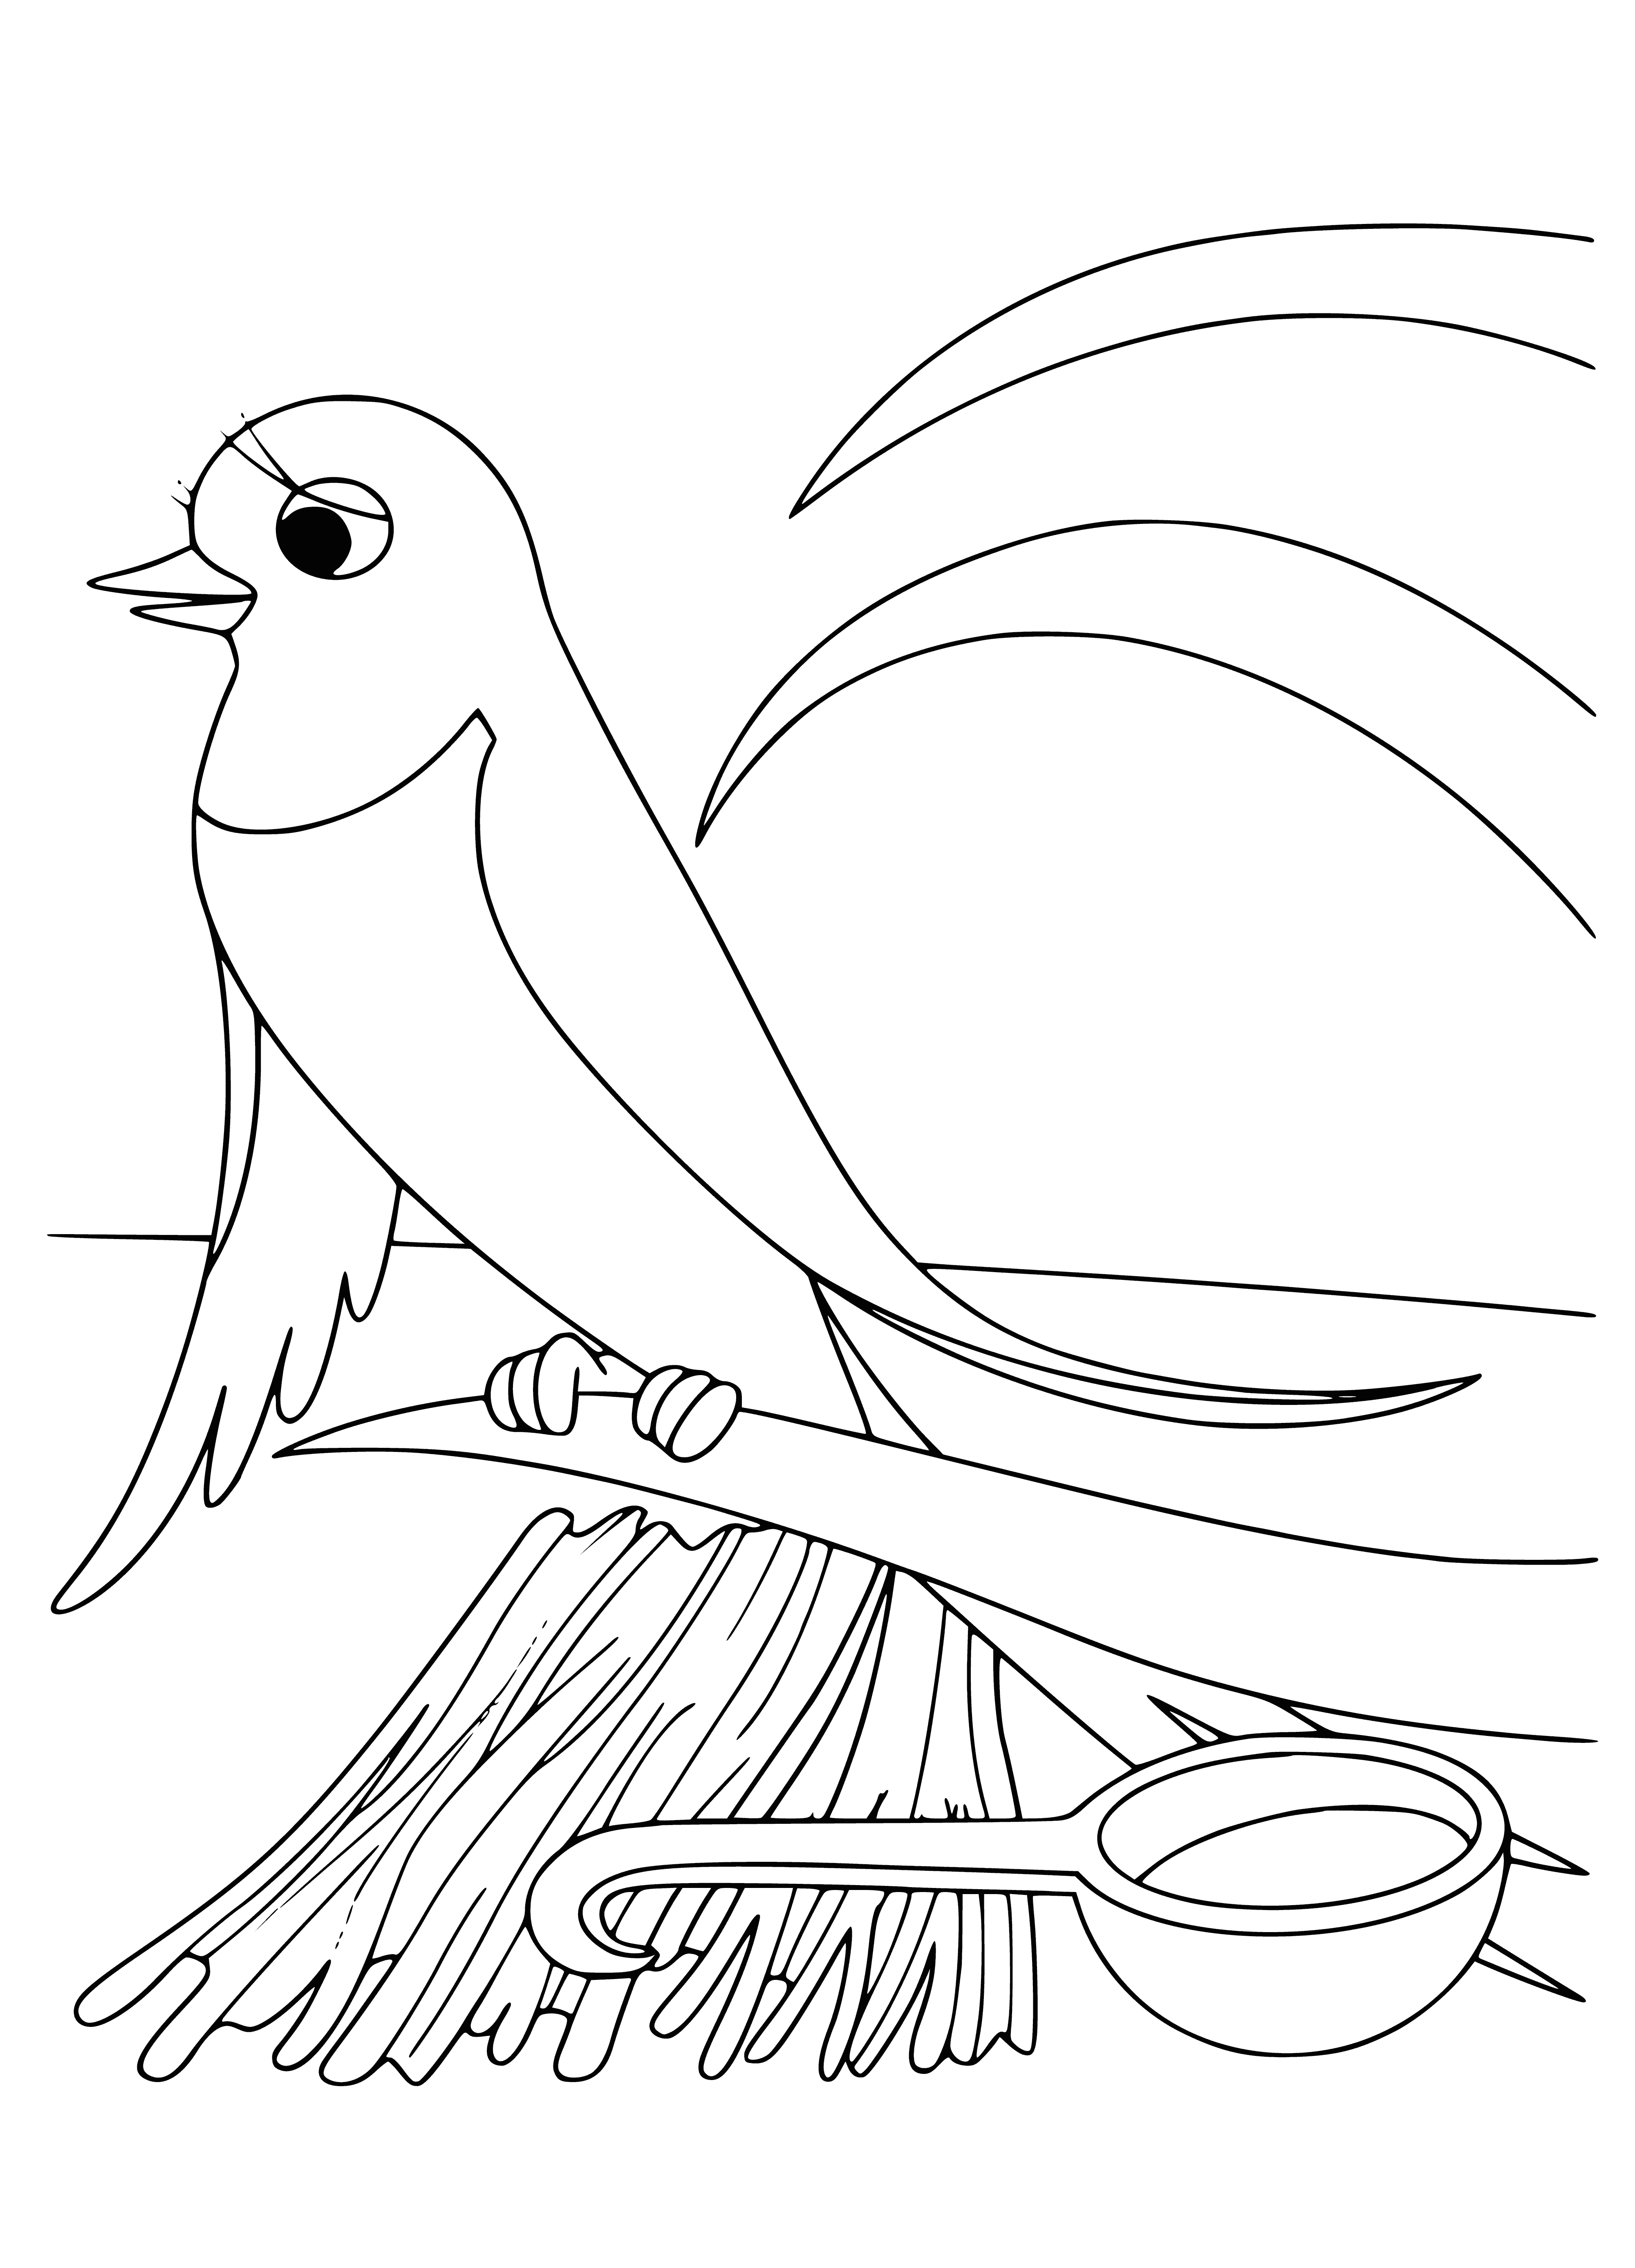 coloring page: Girl in red dress sits on yellow mushroom & smiles, holding blue flower; yellow bird & green bush in background.